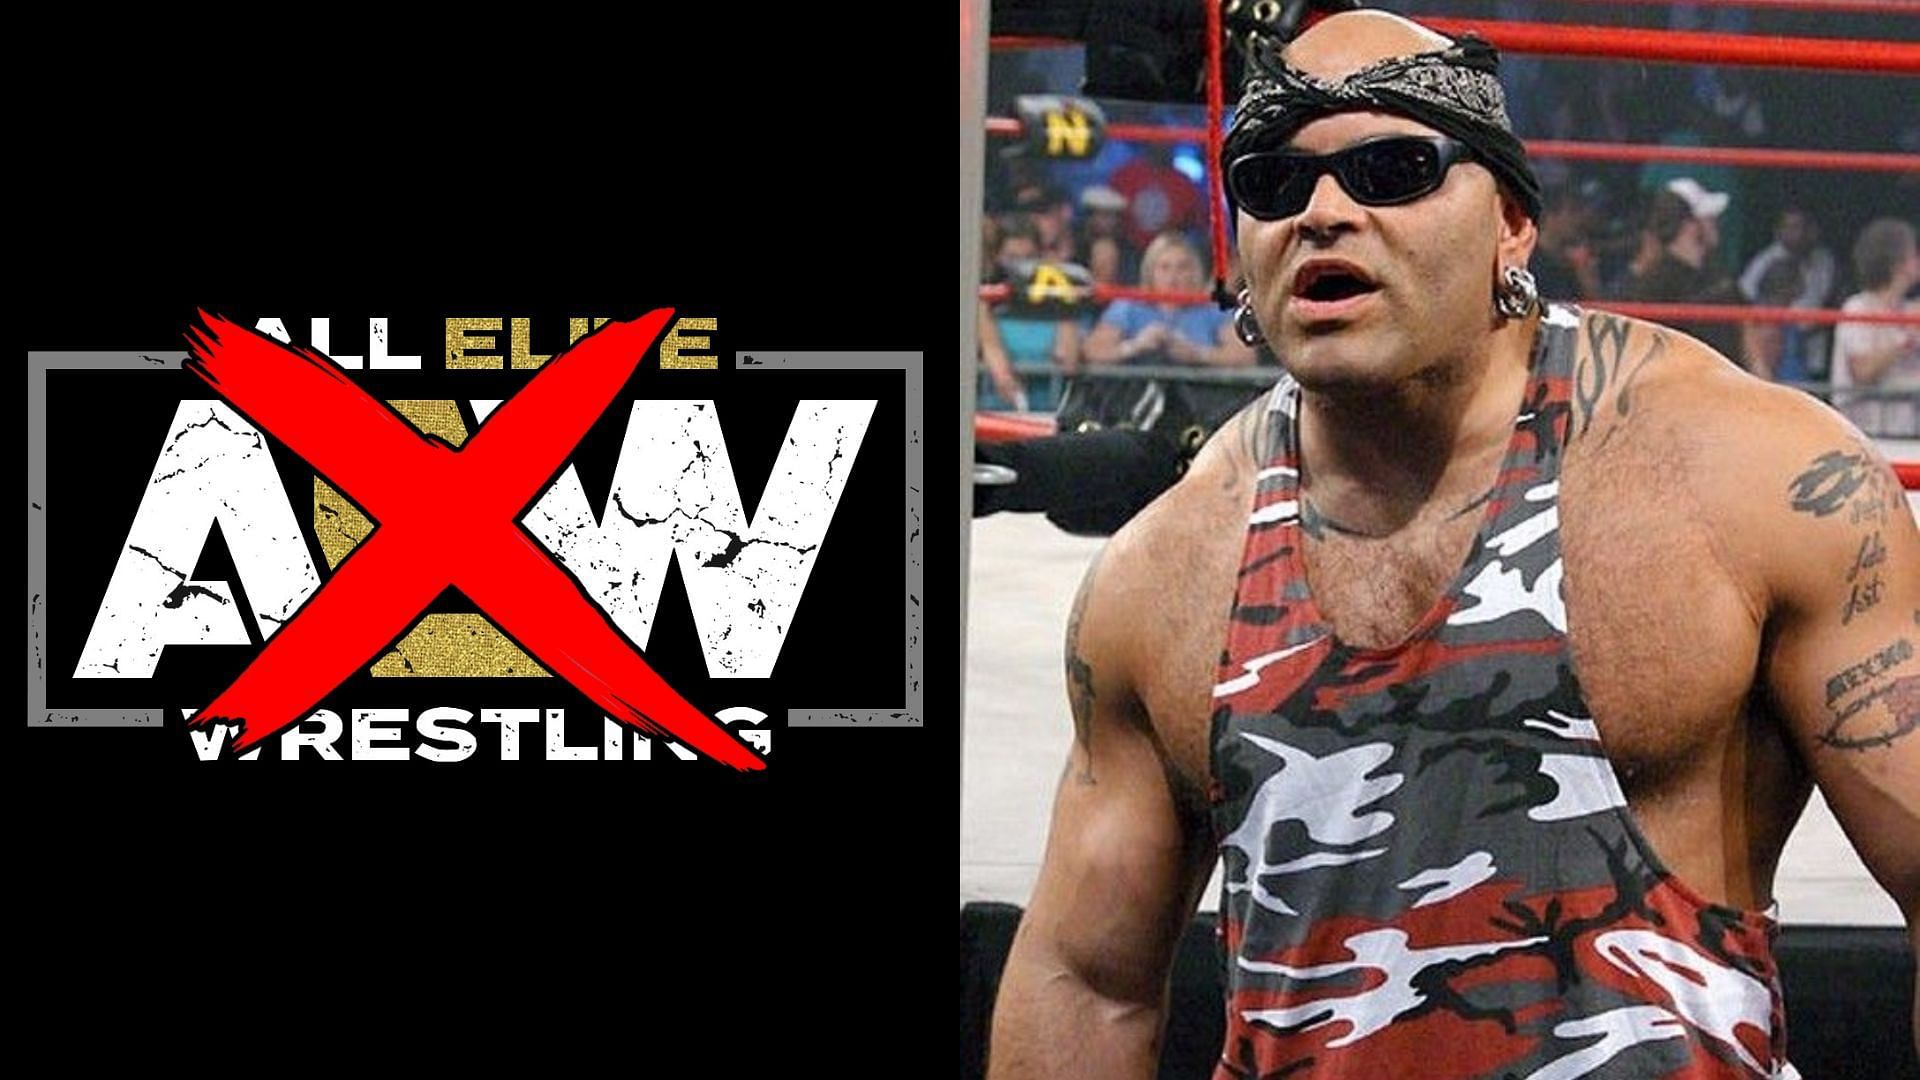 Is Konnan right about his assessments on this segment?